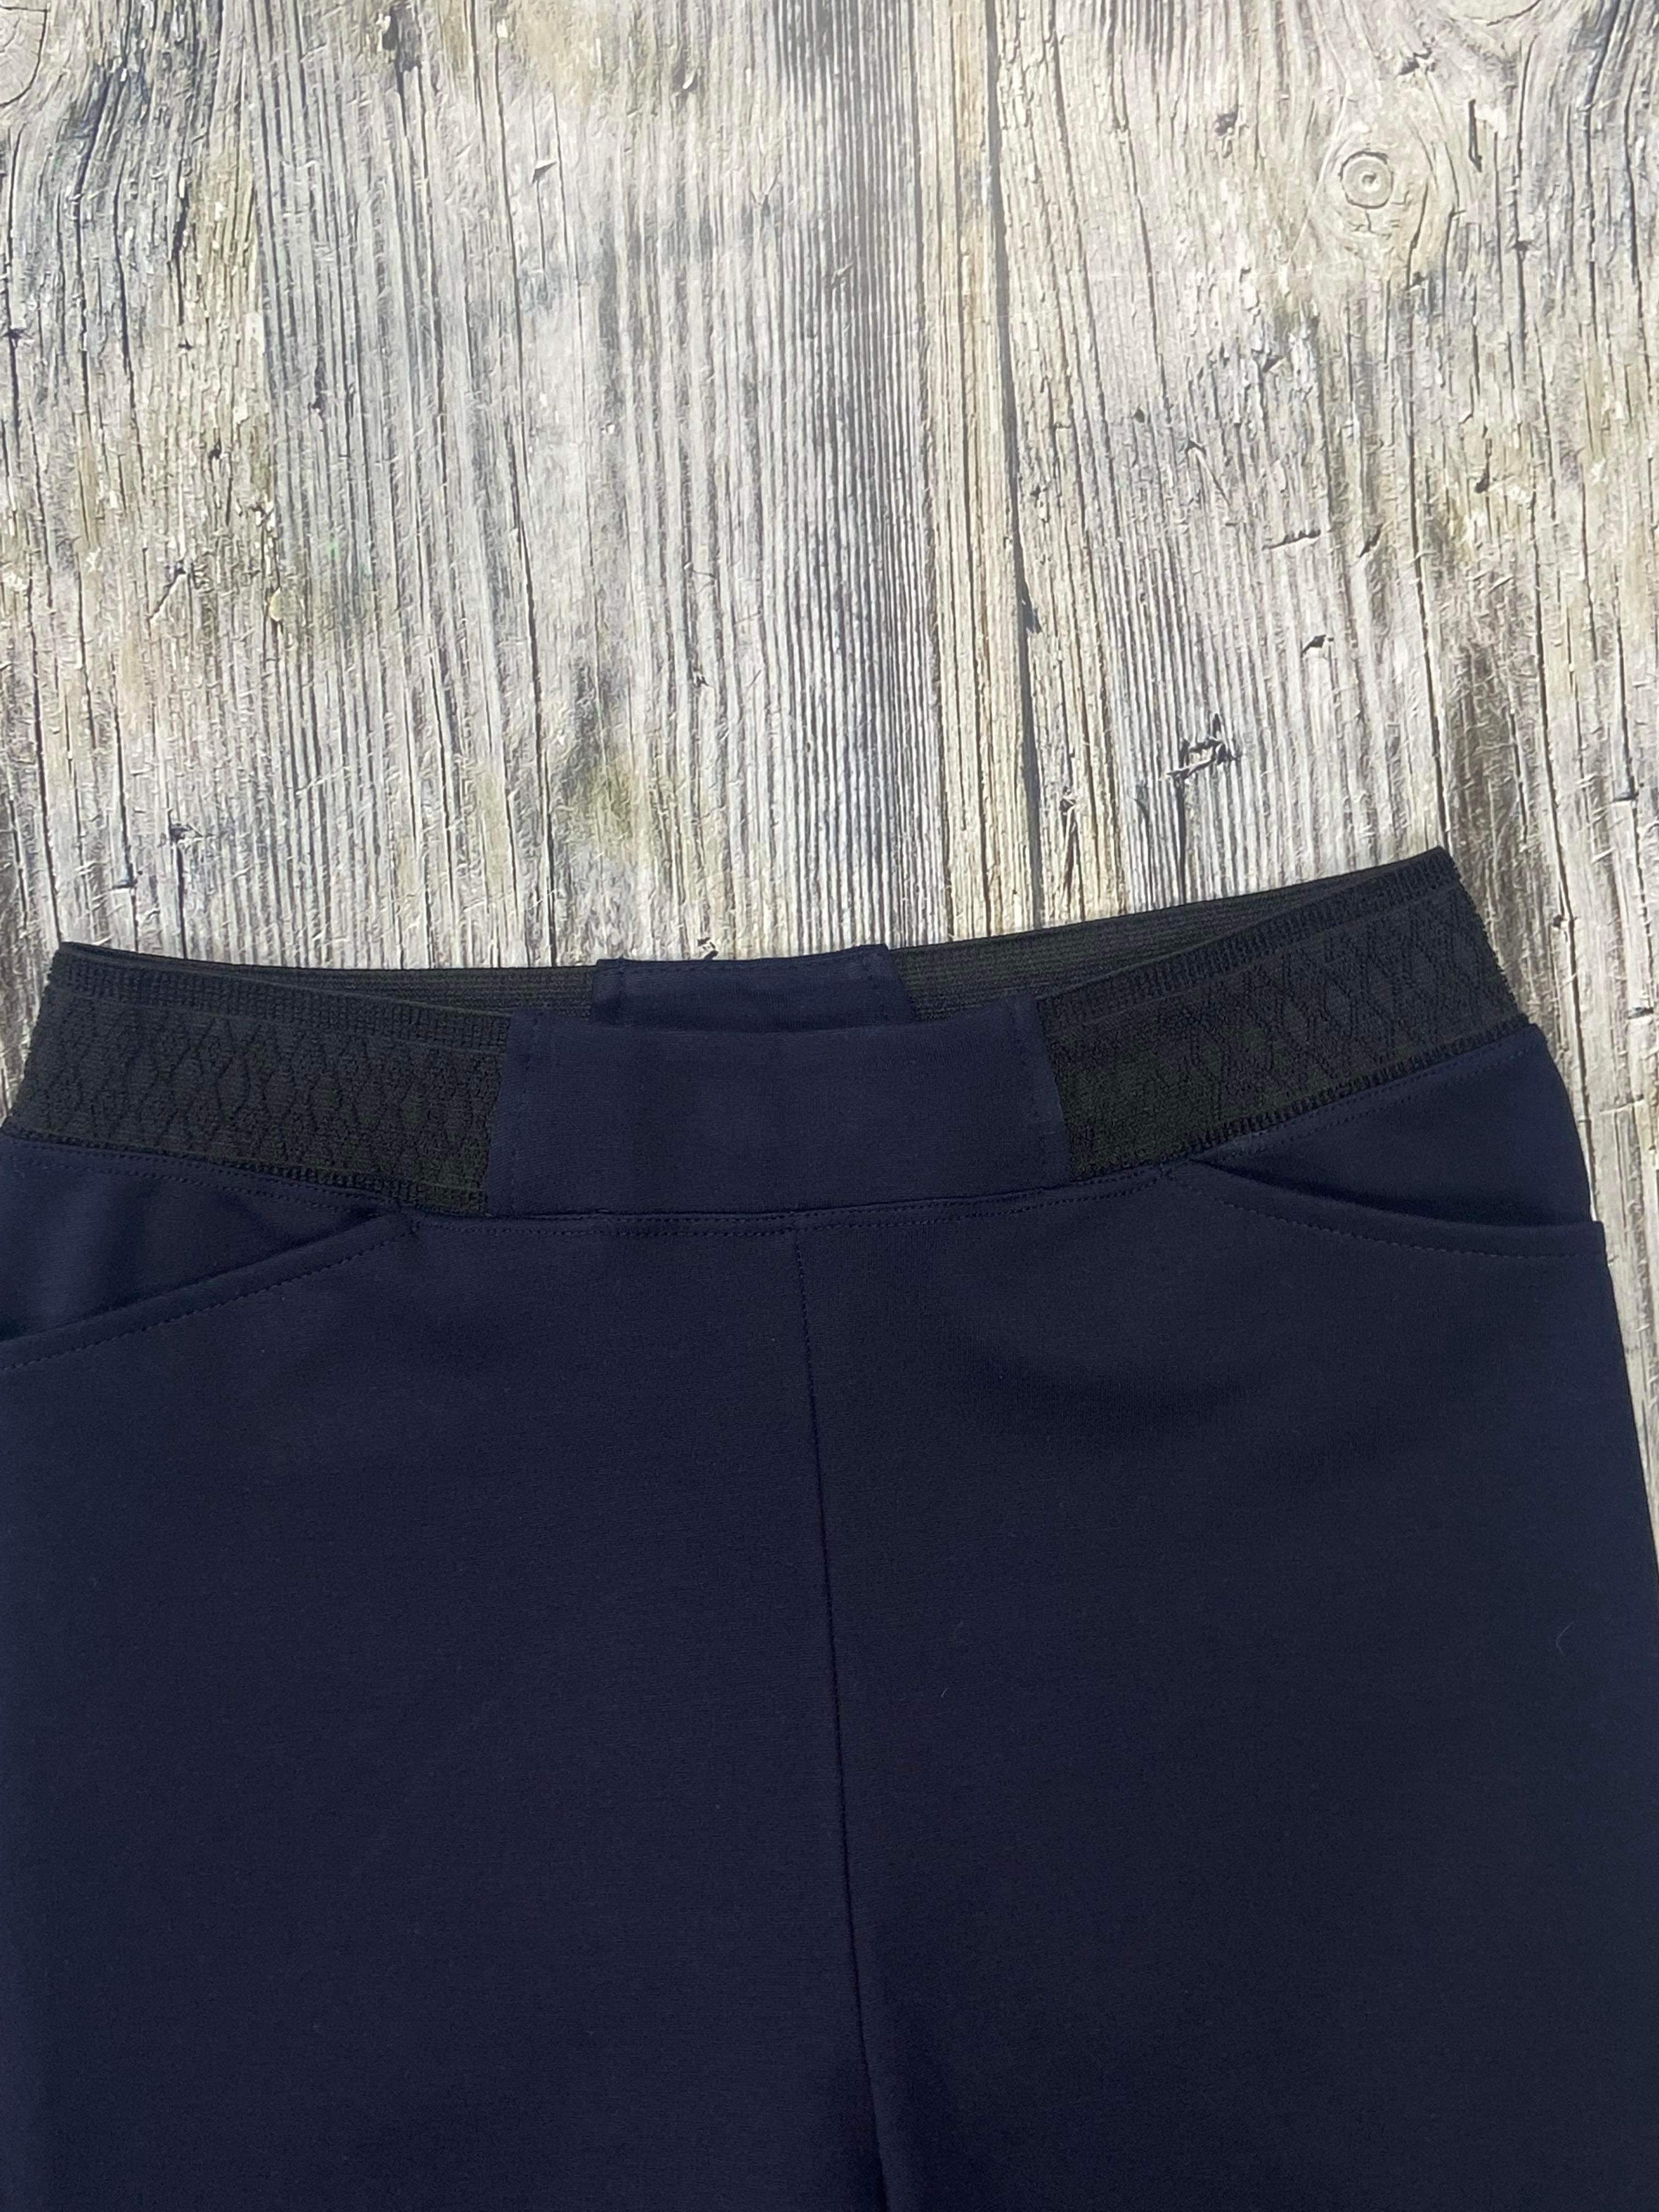 Perfect Navy Petite High Waisted Ponte Pant